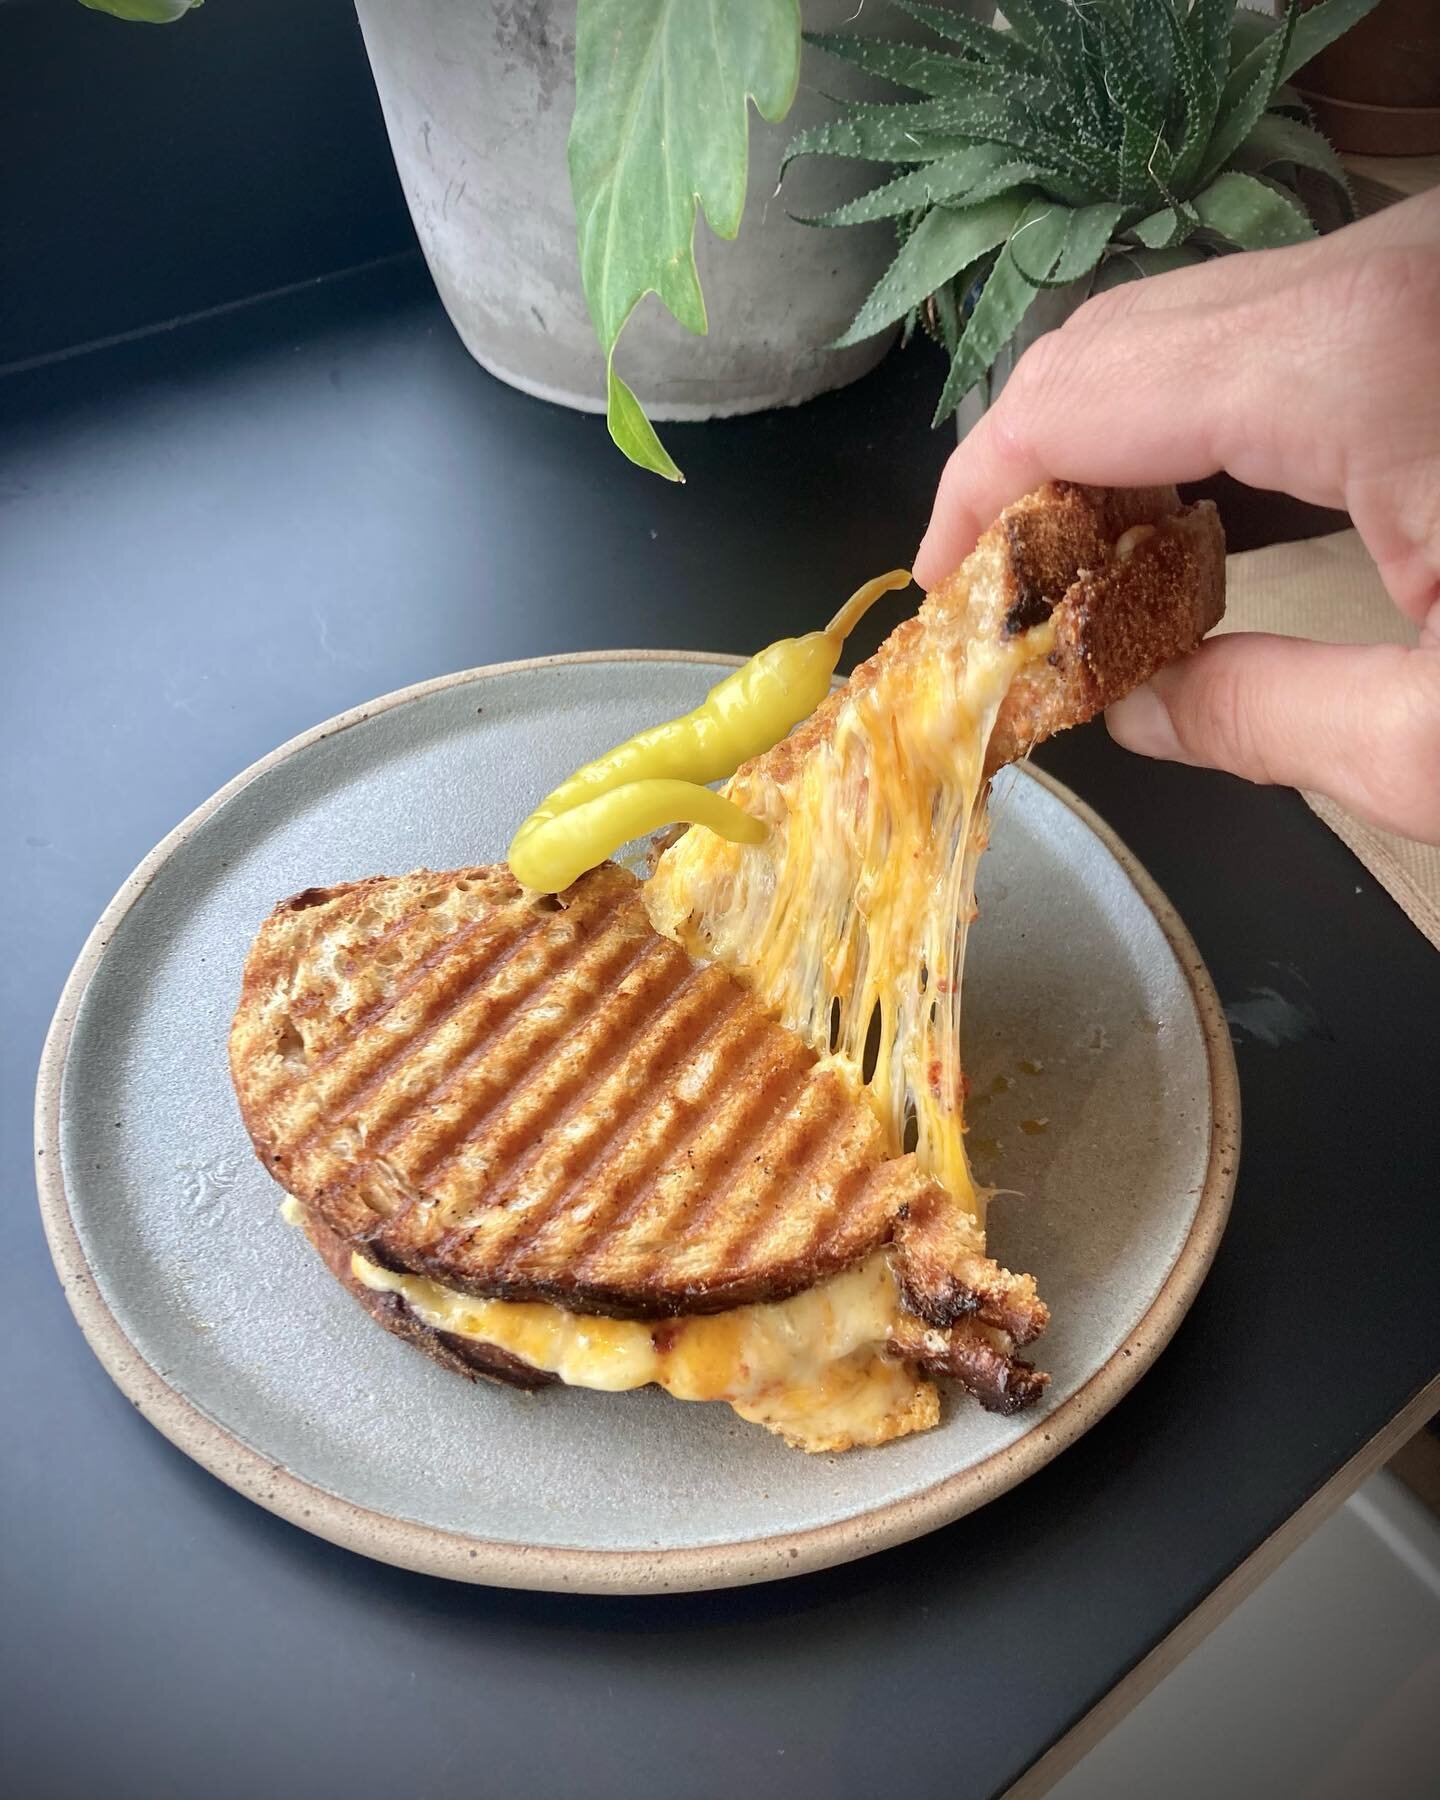 SWEET CHEESUS!⁣
⁣
3 🧀 toastie comin at ya 💥 ⁣
⁣
Available with spicy Cornish nduja or pickled gherkin.. ⁣
⁣
Coffee shop OPEN - Tuesday to Saturday 8.30am til 3pm (food served 9am-2.30pm) ⁣
⁣
⁣
⁣
⁣
⁣
#toastiewiththemostie #cheesylover #cheesesweats 